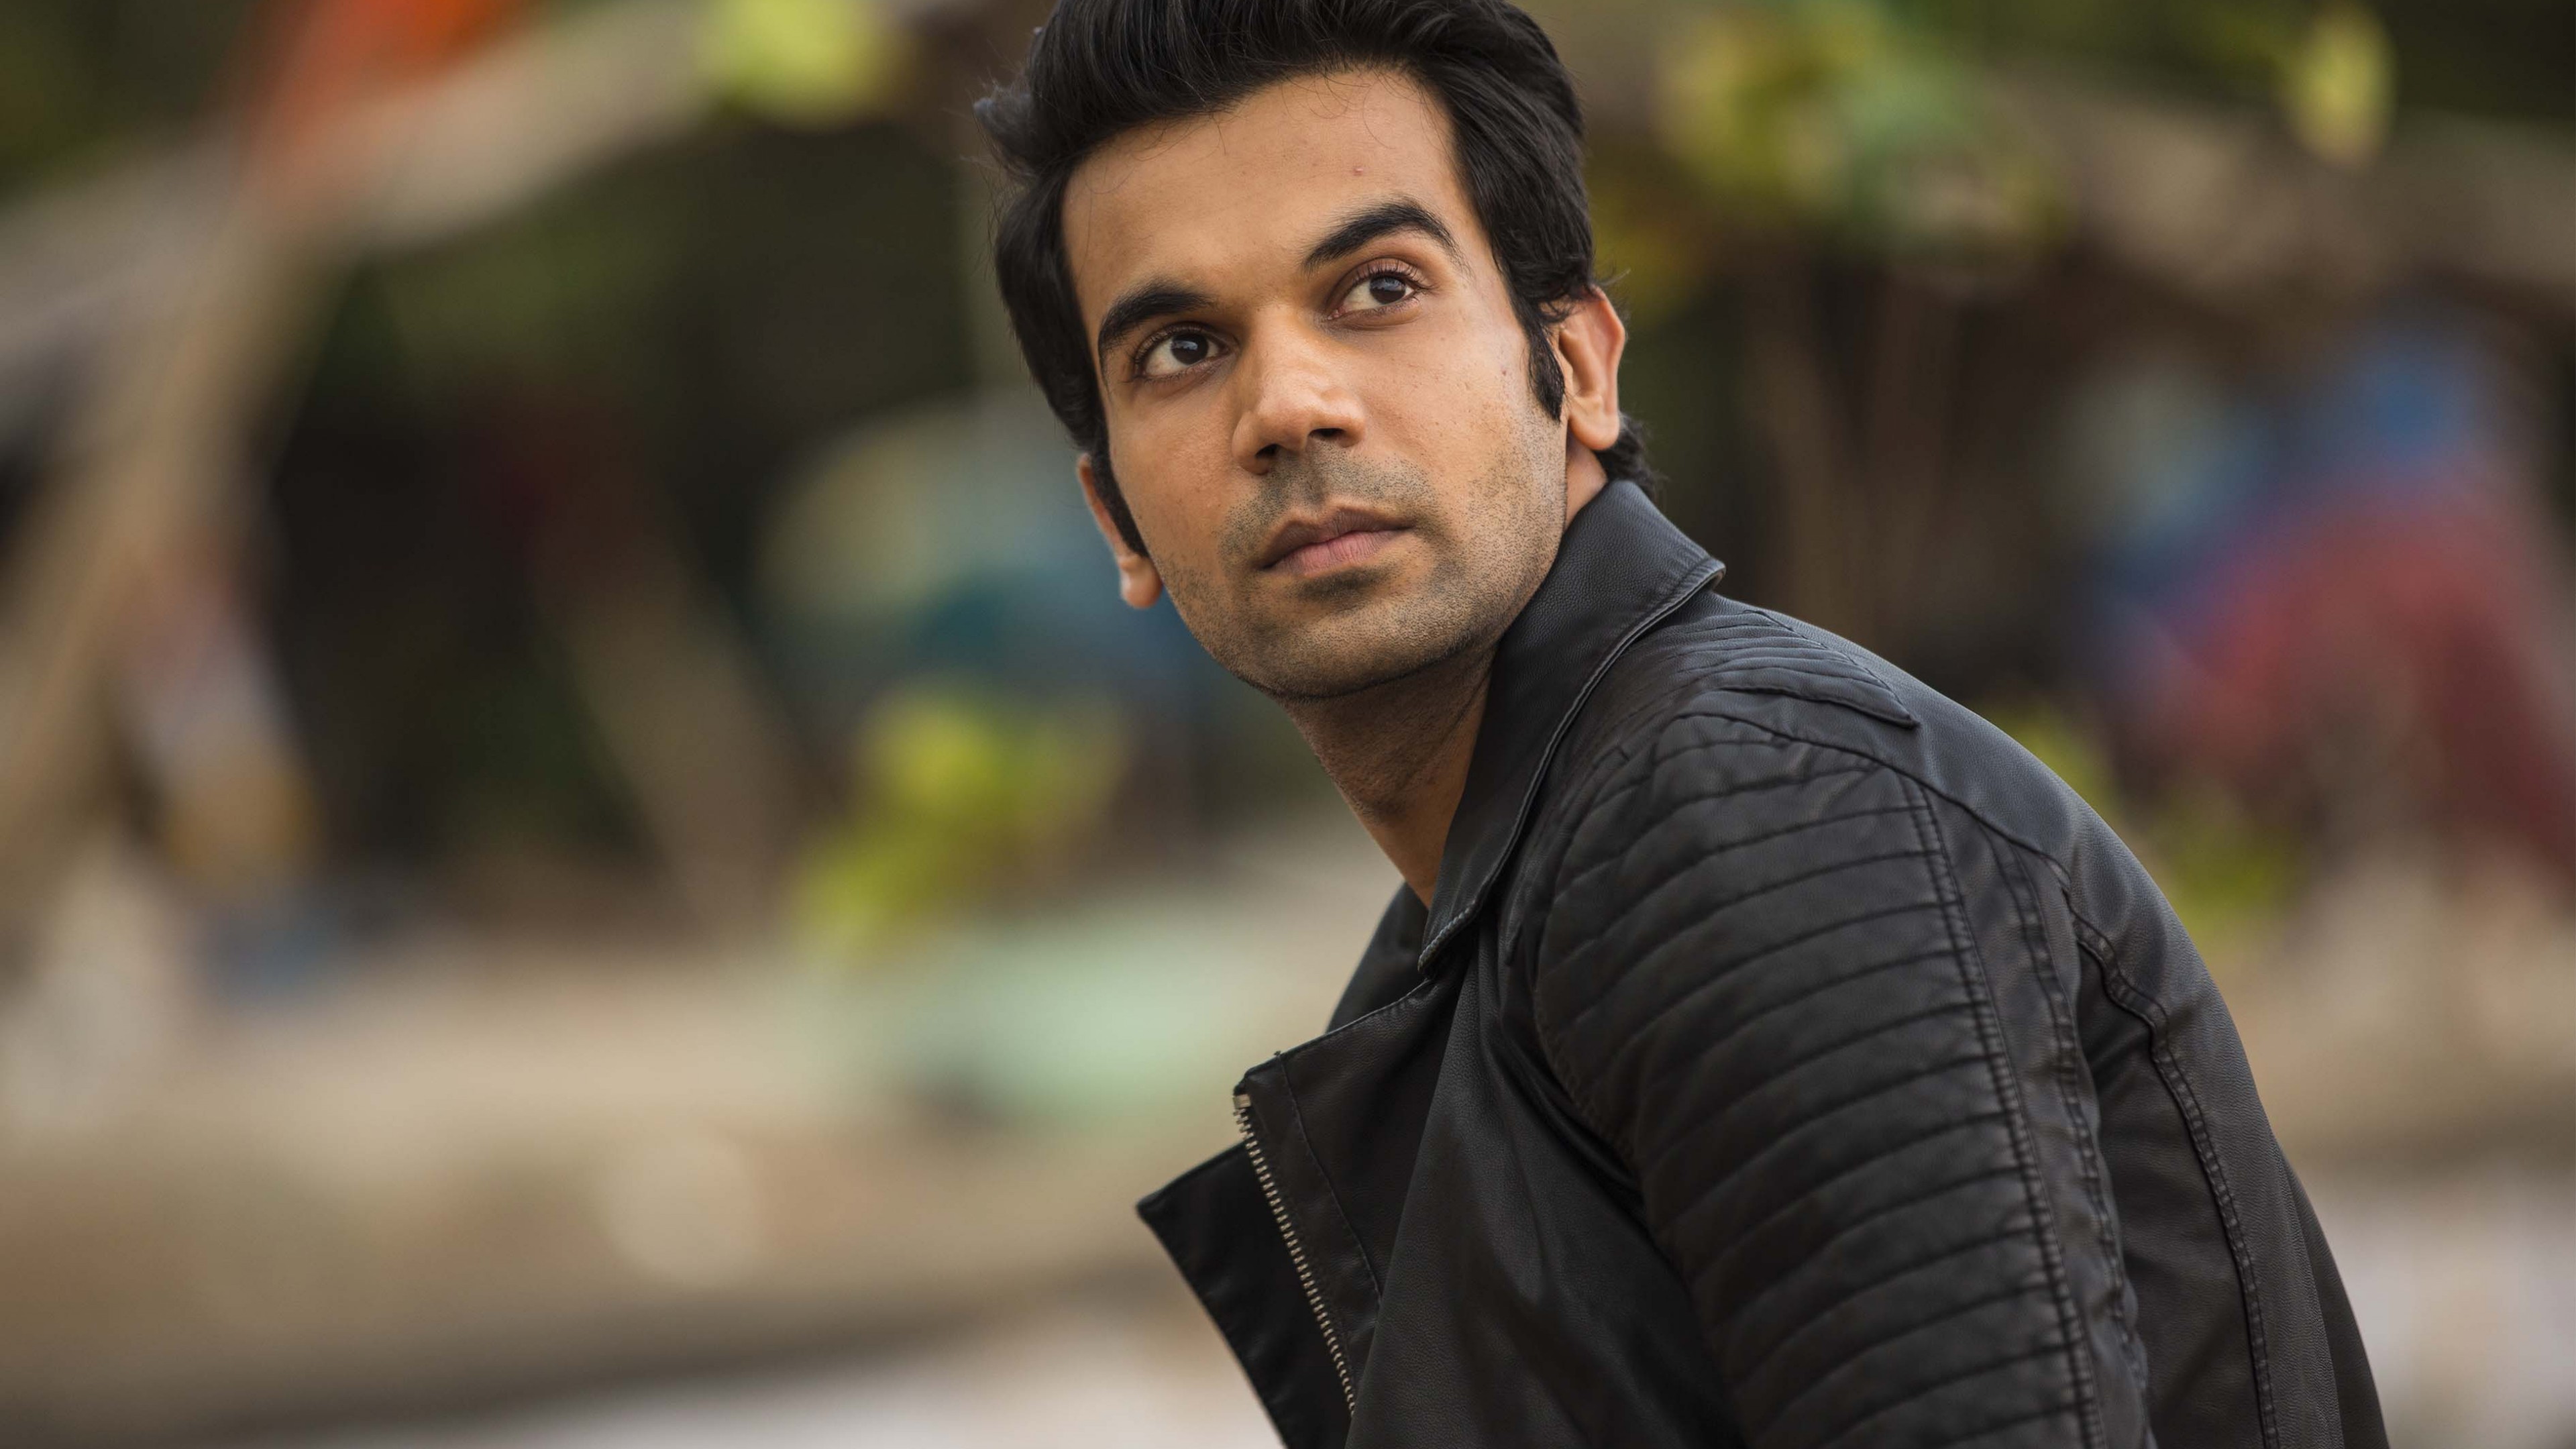 Which of these happened to be the highest grossing movie of Rajkummar Rao?